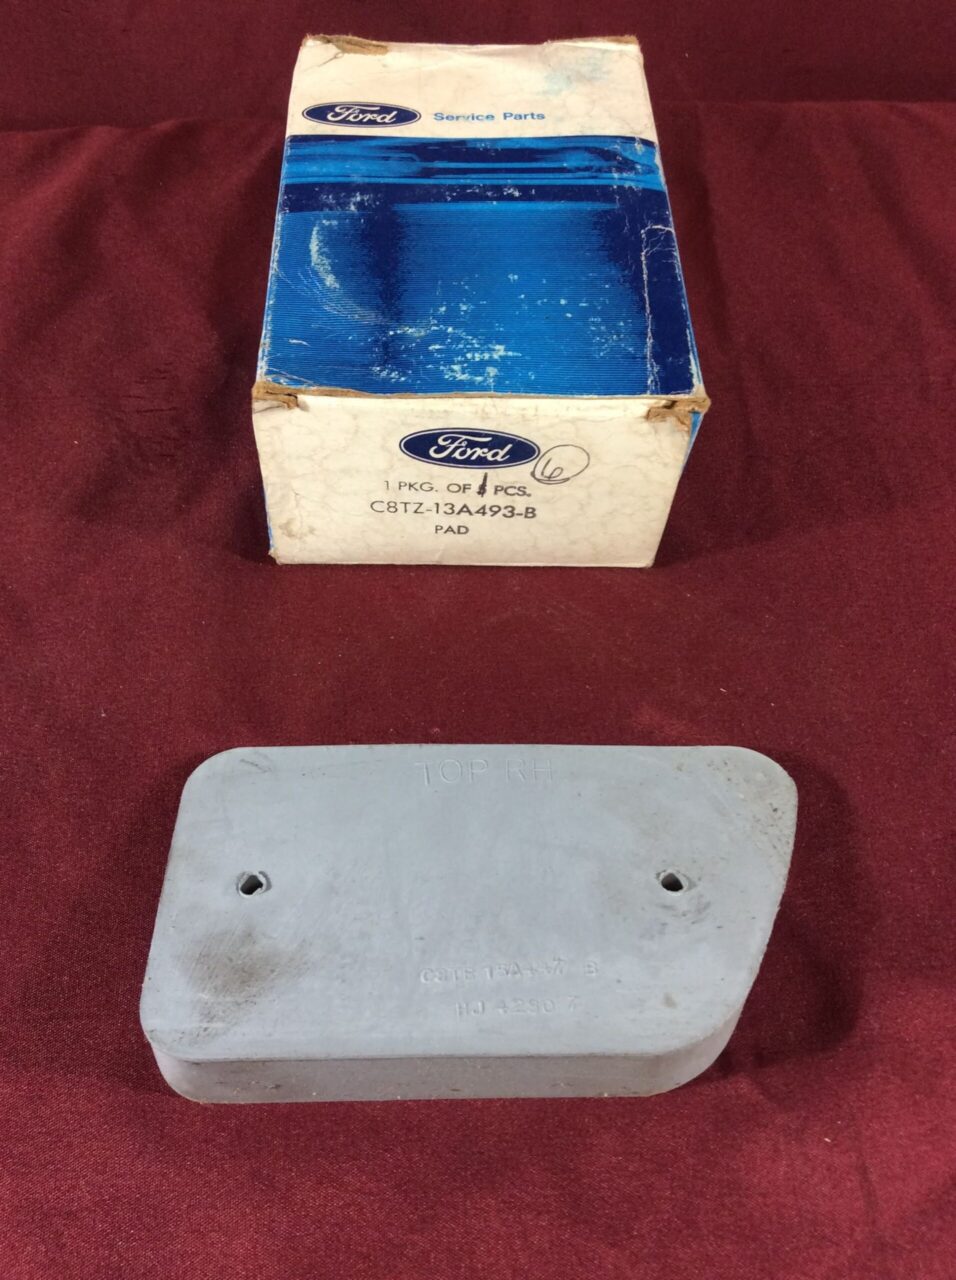 Nos front right marker reflector pad. C8TB-15A447-B